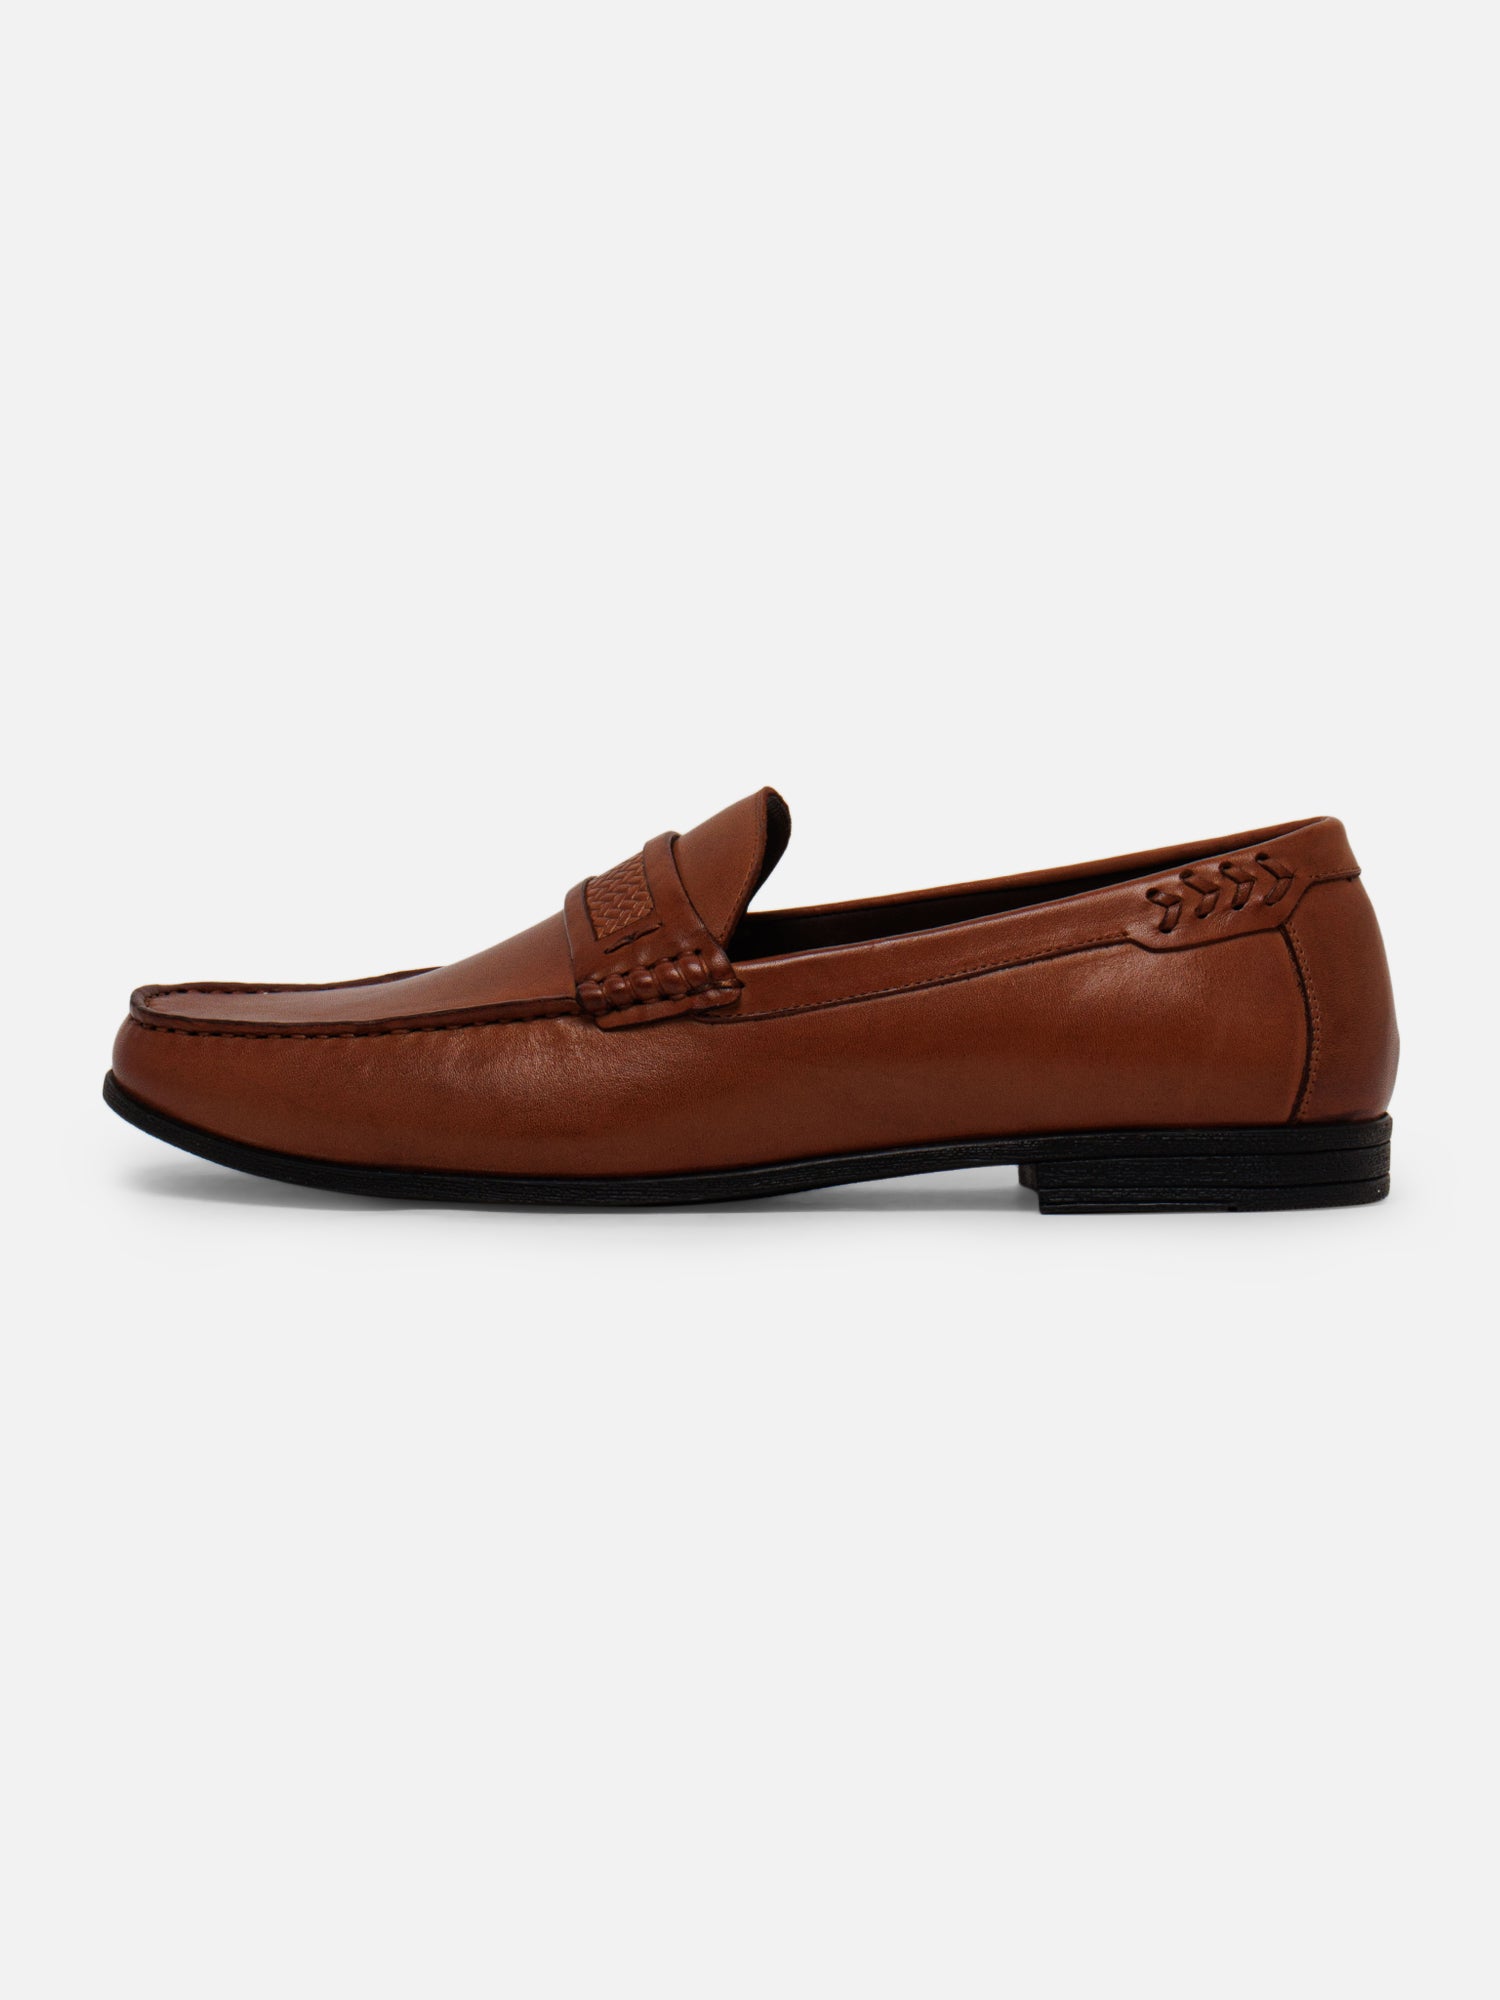 Buy Online Mens Formal | Casual | Pure Leather Shoes and Moccasins ...